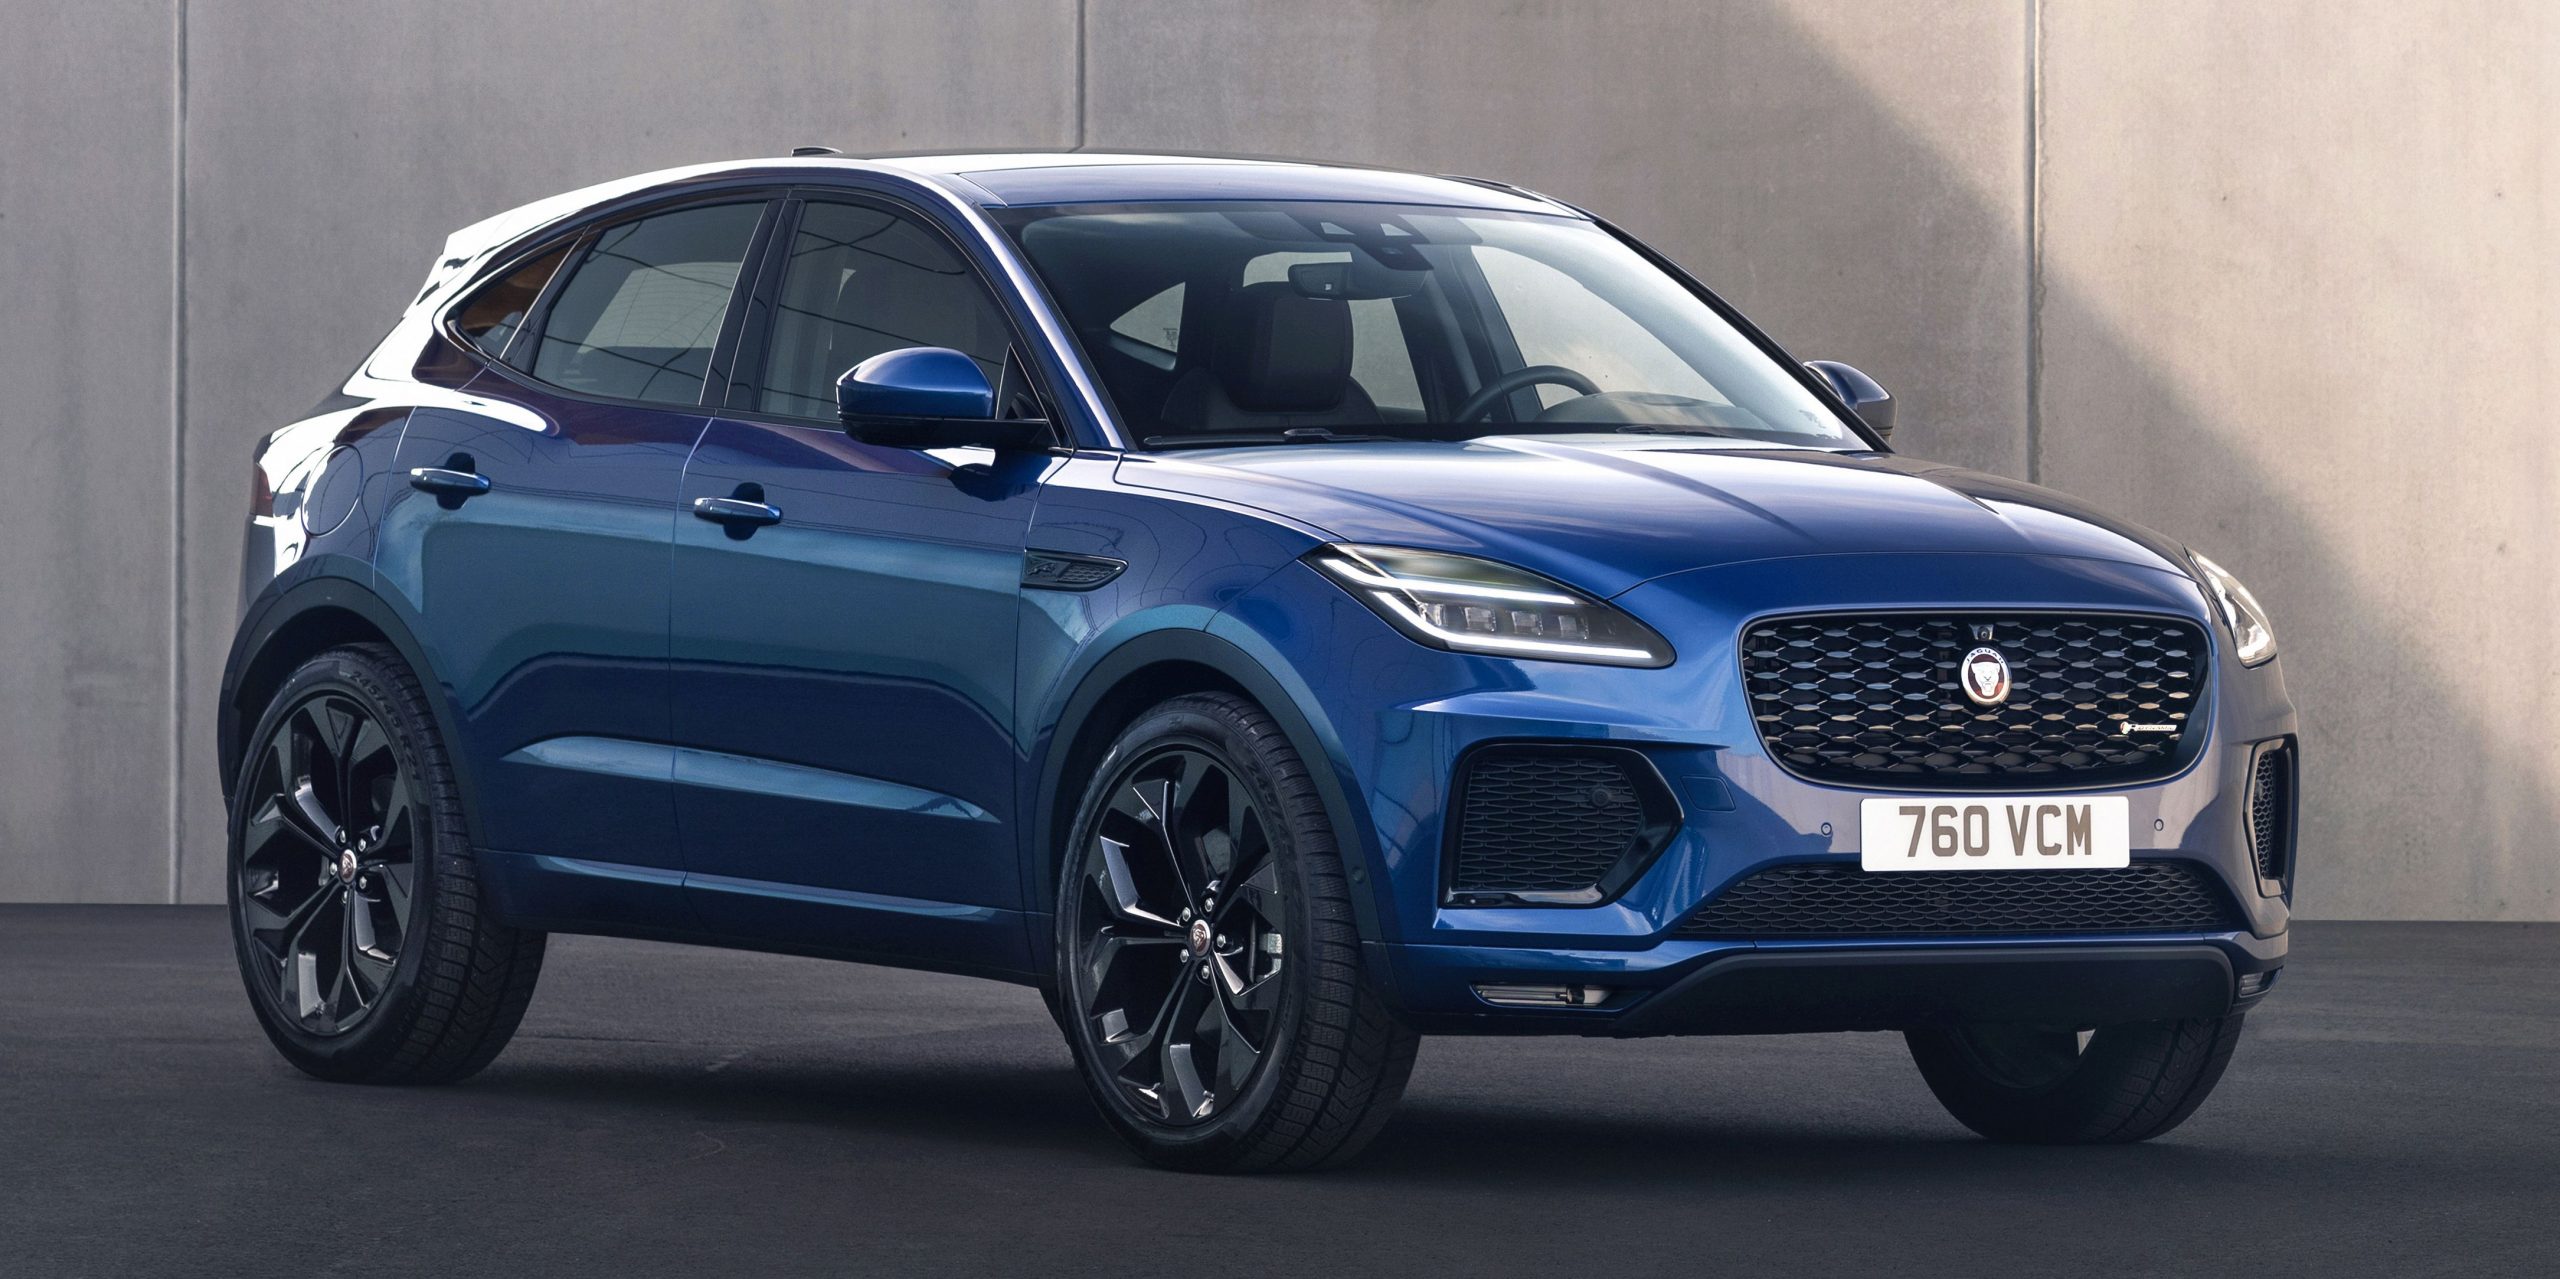 2021 Jaguar E-Pace Freshened with New Looks, Upgraded Infotainment